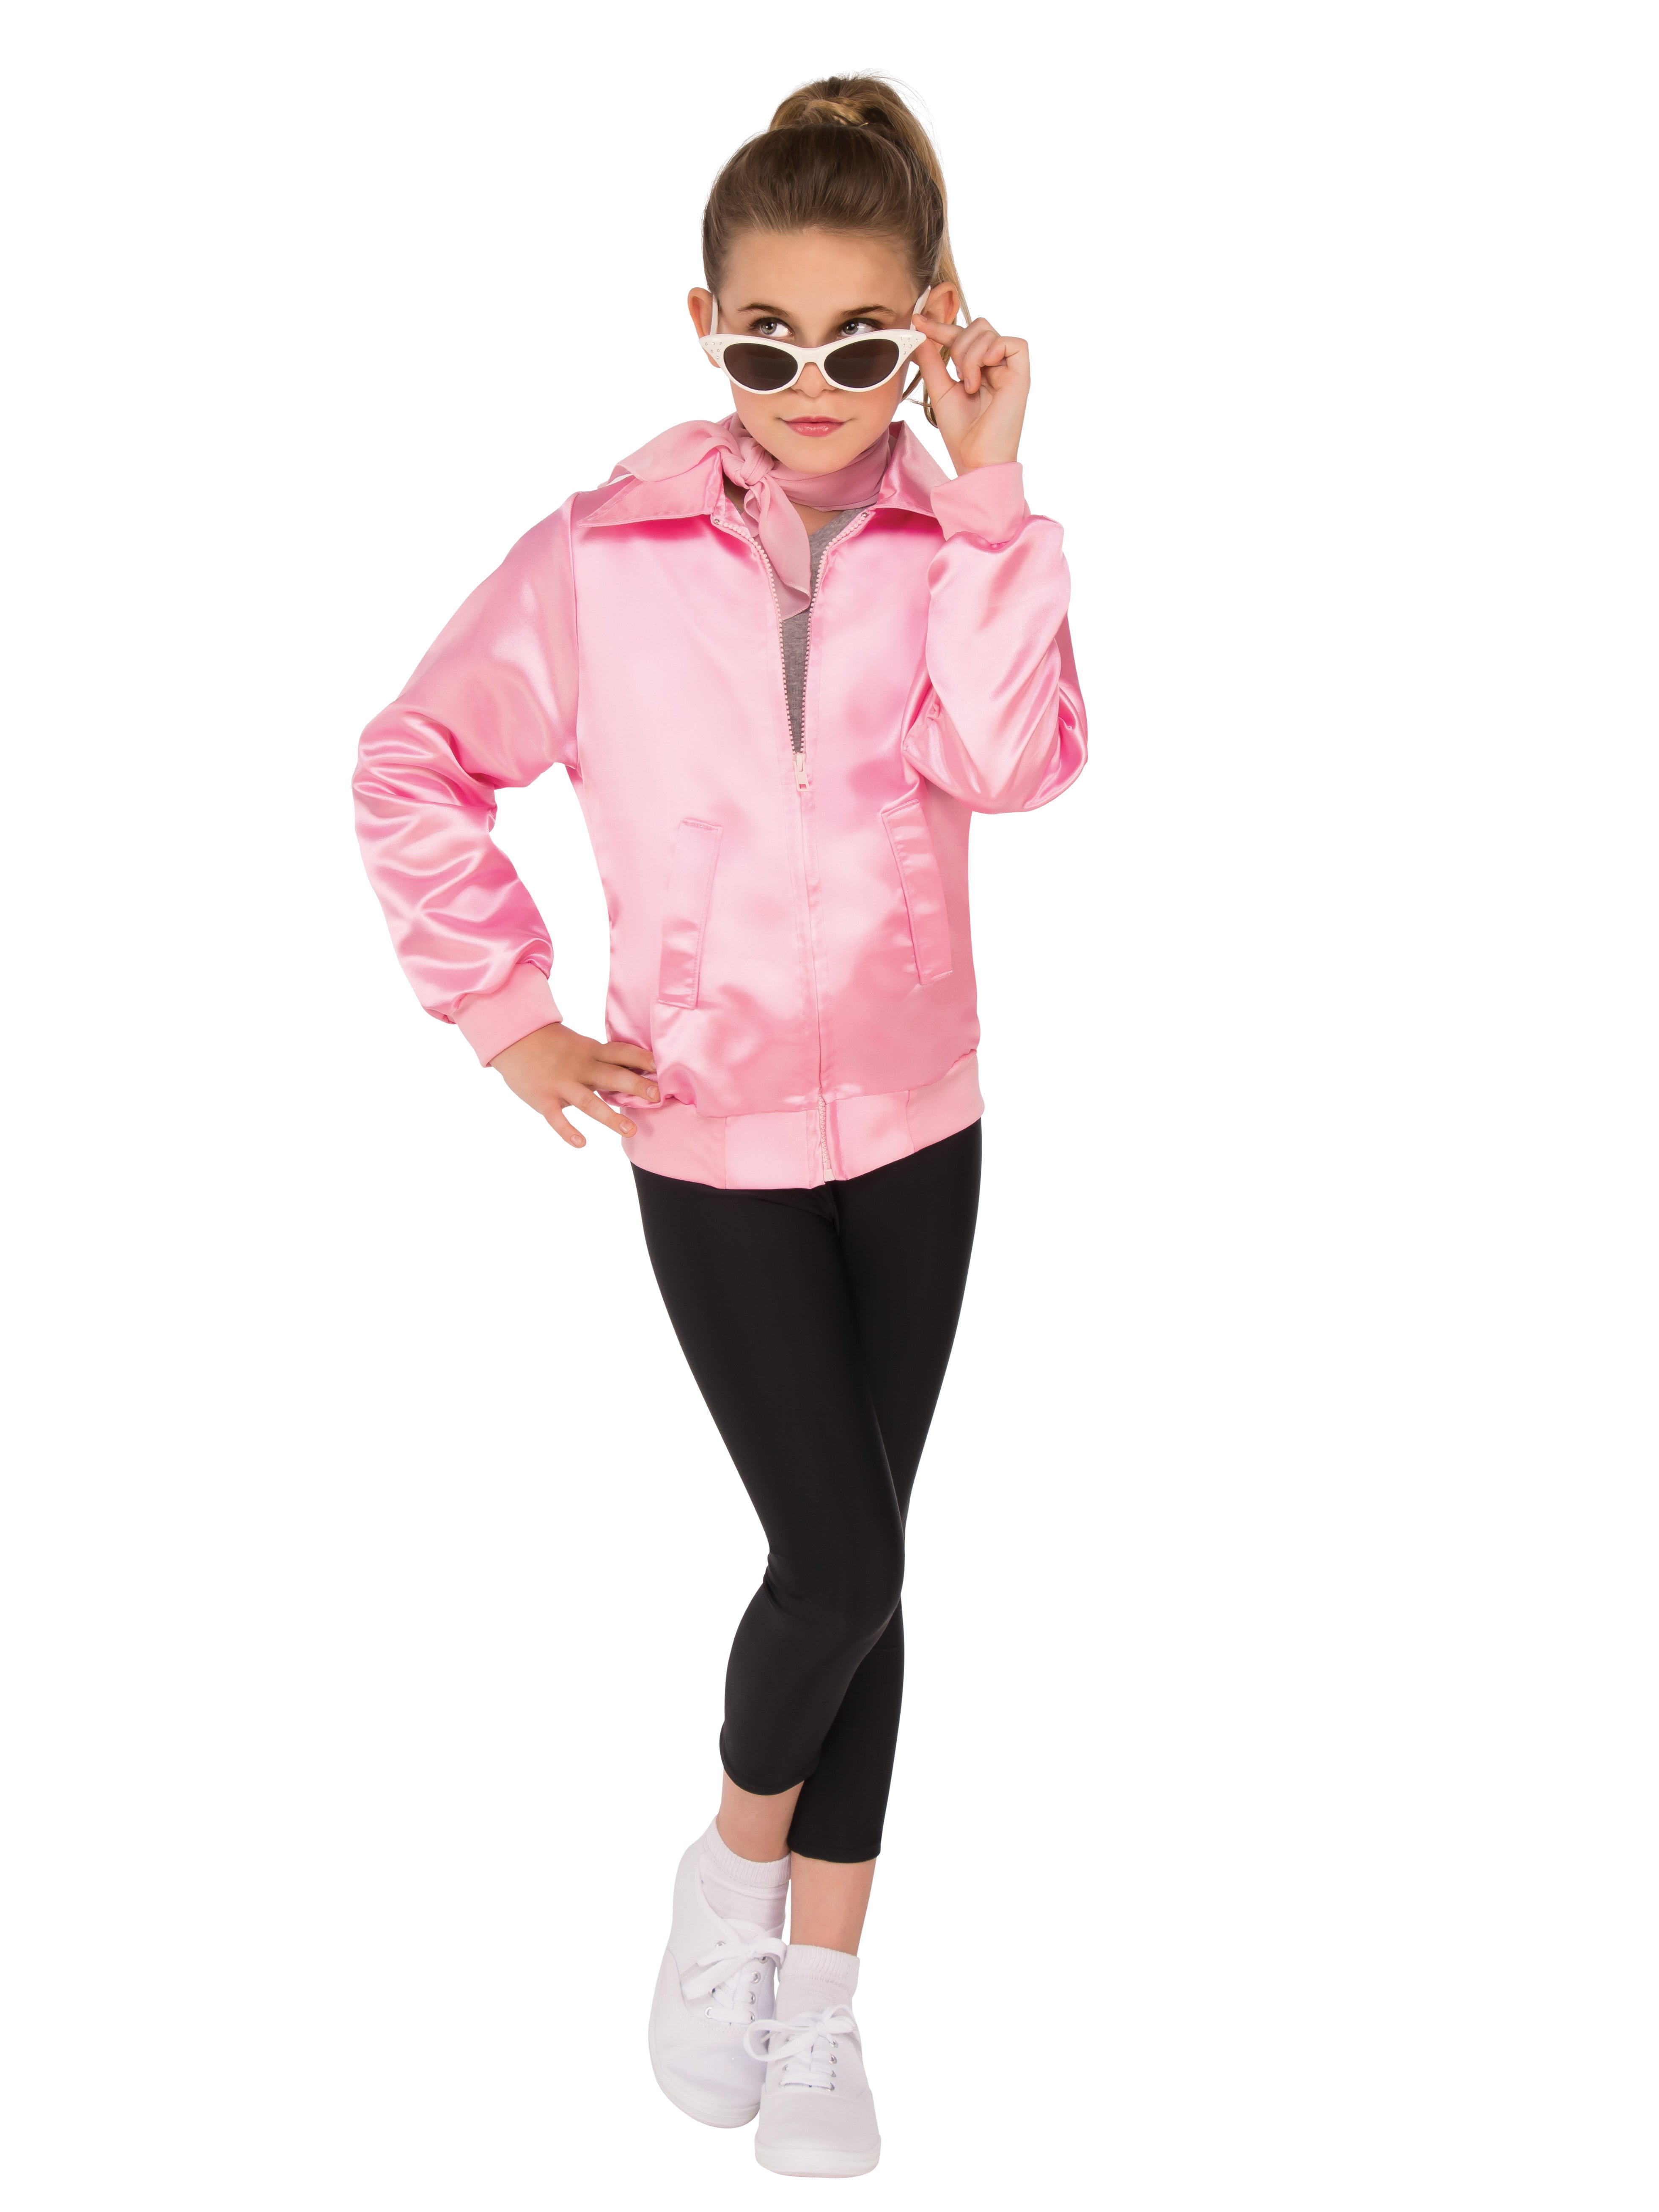 Girls Childs Kids Grease Movie Pink Ladies Jacket Fancy Dress Licensed Outfit 